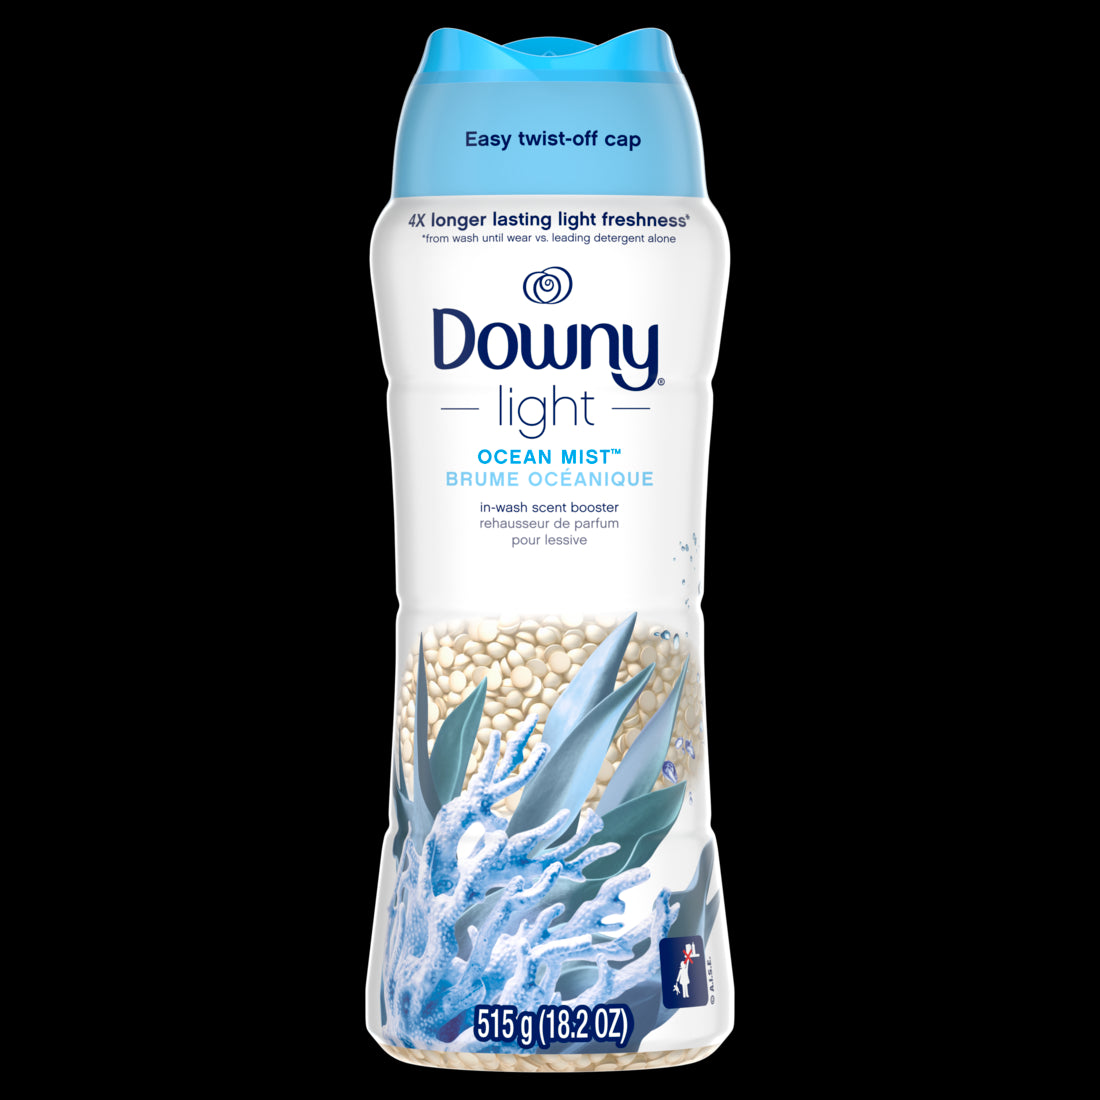 Downy Light Laundry Scent Booster Beads for Washer Ocean Mist with No Heavy Perfumes-18.2oz/4pk